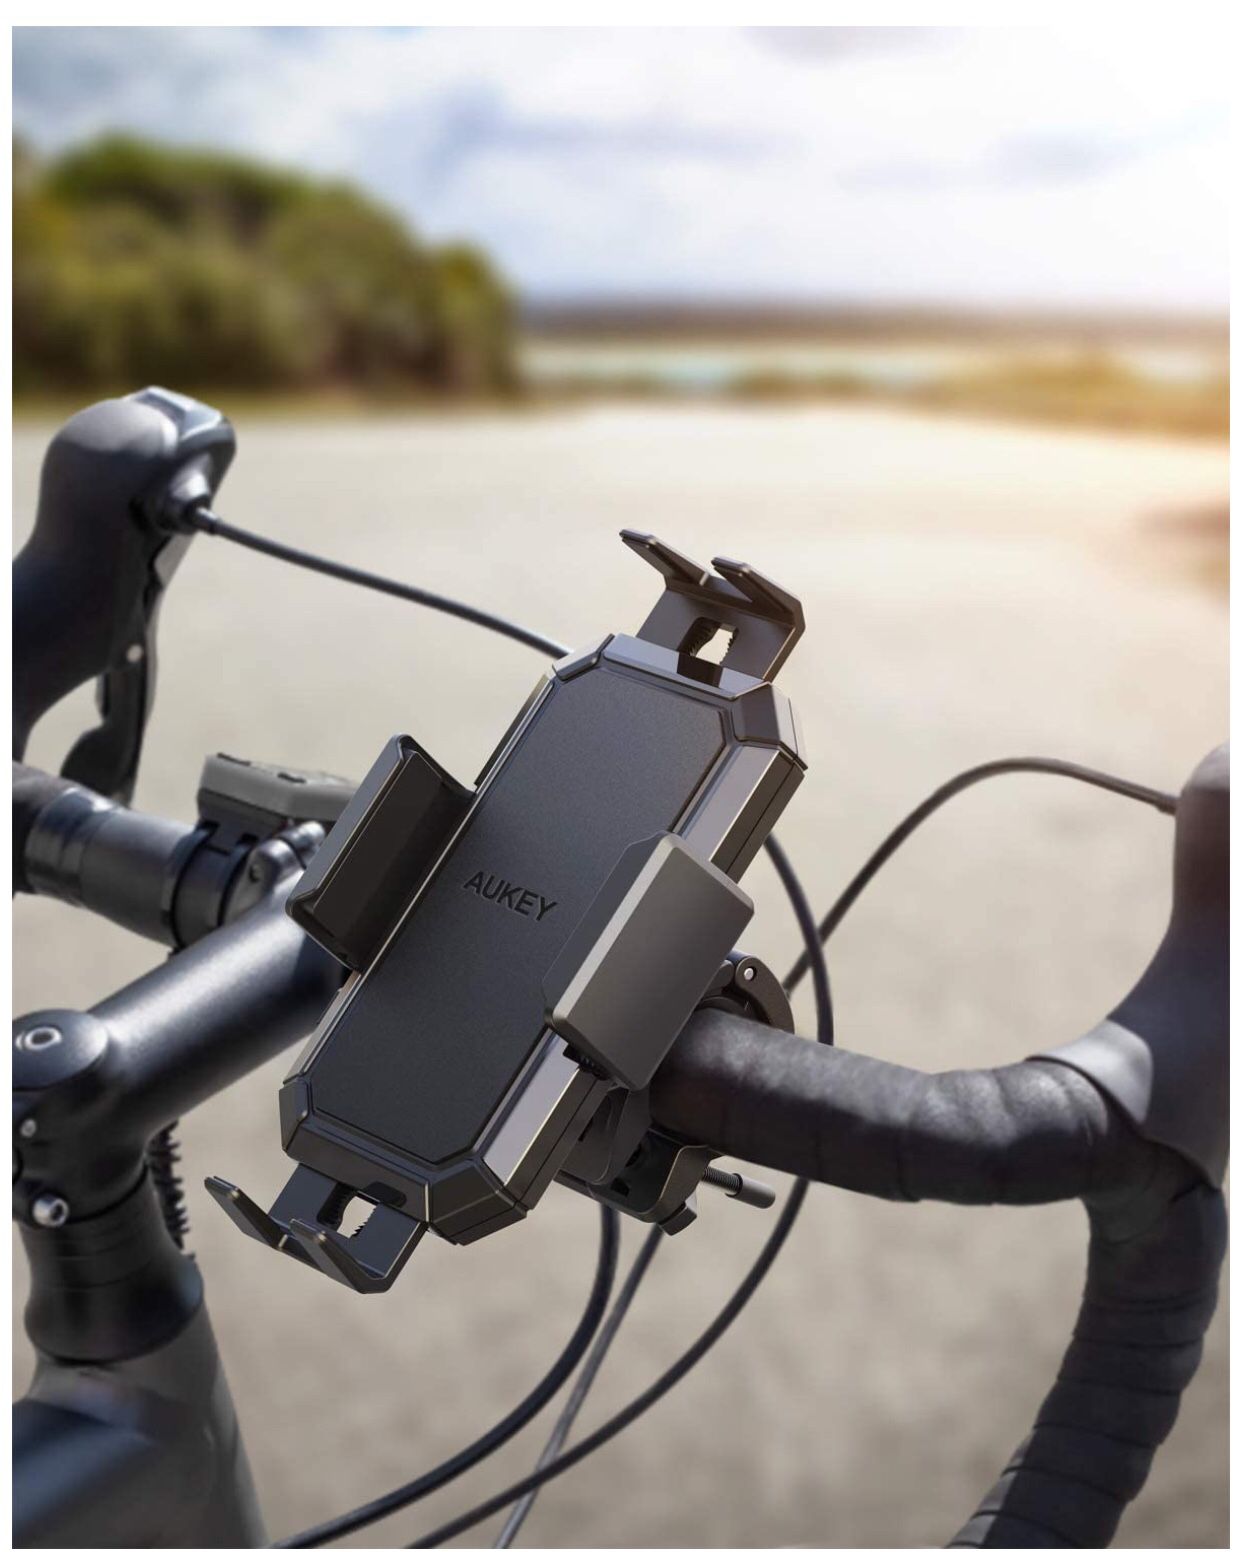 Y Bike Phone Mount Anti Shake 360 Rotation Bicycle Motorcycle Phone Mount for Handlebar Bike Accessories Compatible with iPhone 12/11 Pro Max/11/XS/8